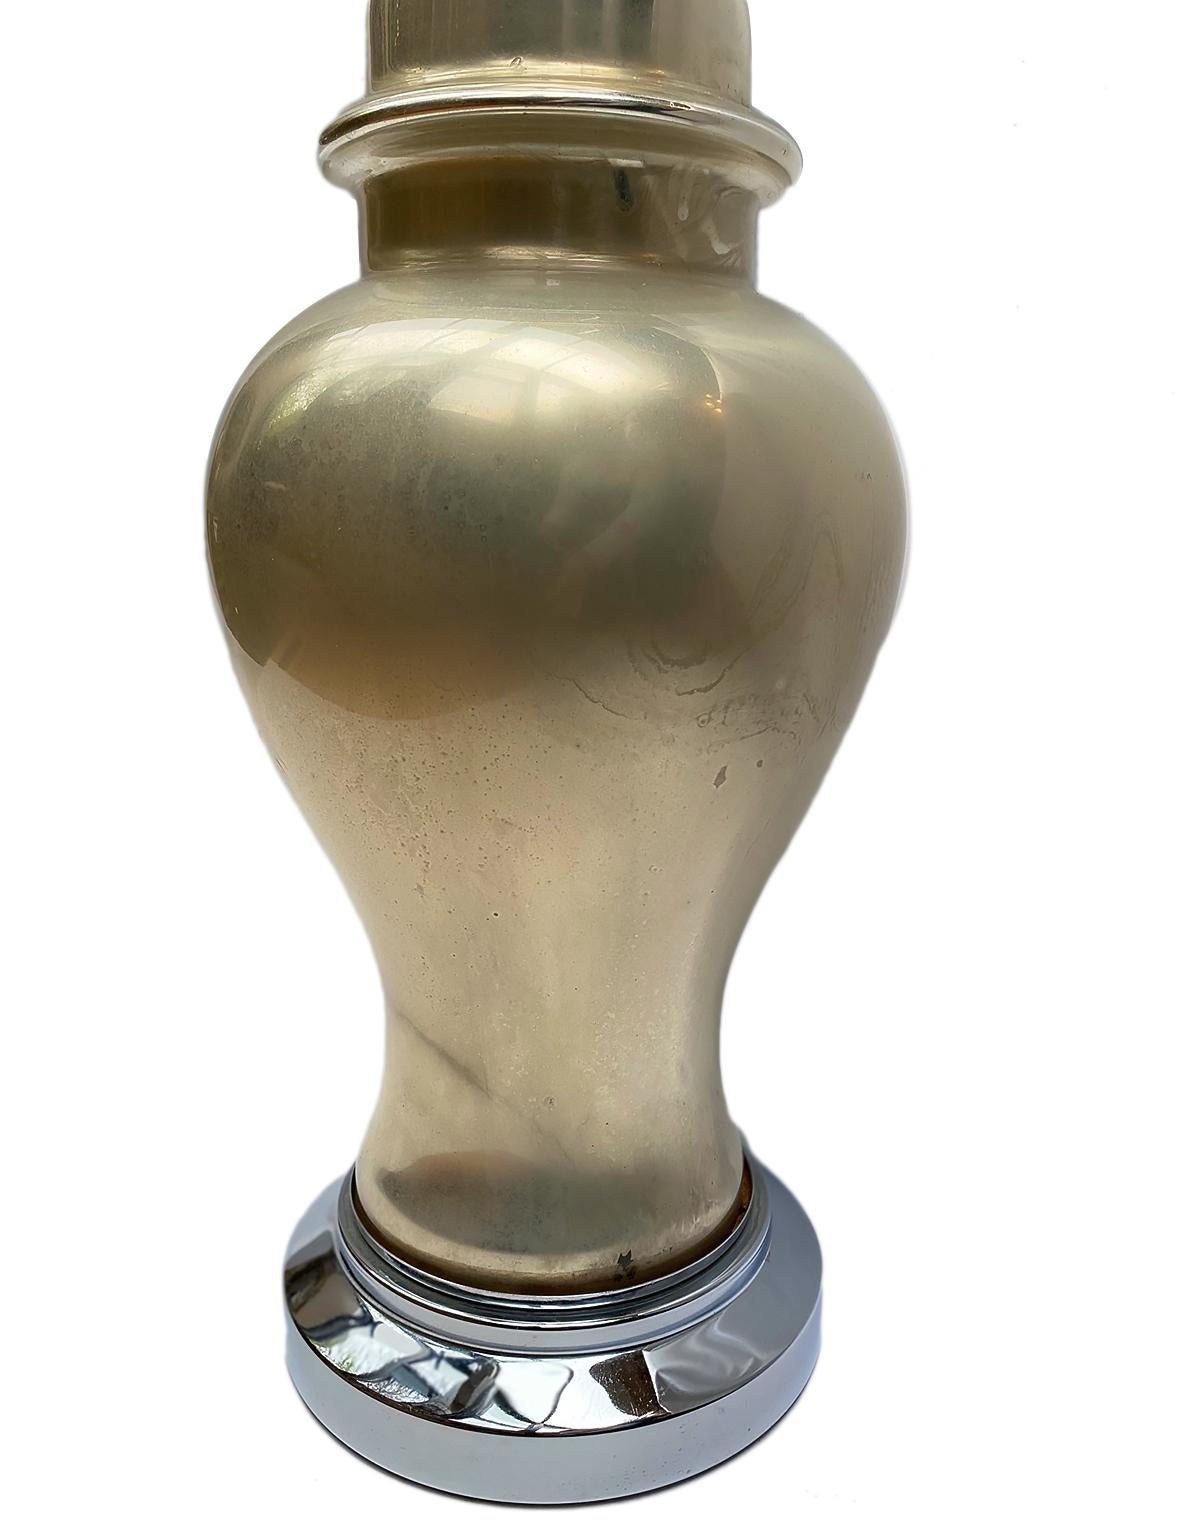 A single French 1920s mercury glass table lamp with silver metal bases.

Measurements:
Height 18